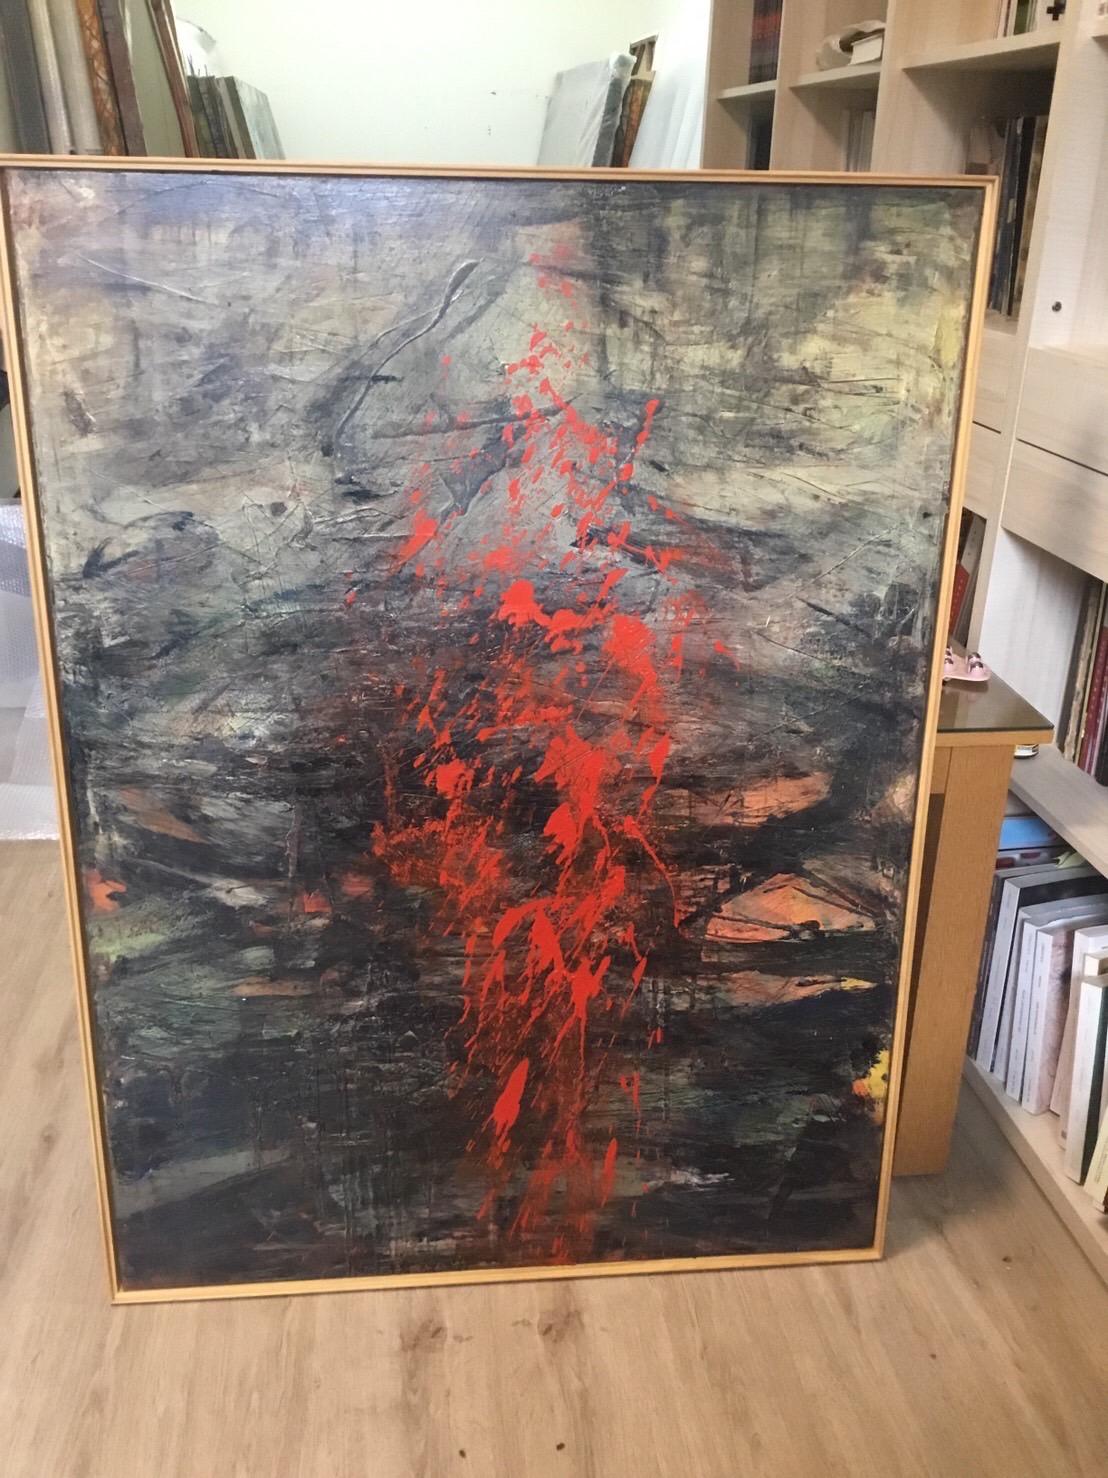 An upcoming exhibition of oil paintings by Hsu Tung Lung at the Shanghai Oil Painting Sculpture Institute in Shanghai, China. The exhibition will open on May 10th, 2023, and will feature a selection of Hsu Tung Lung's work from various periods,